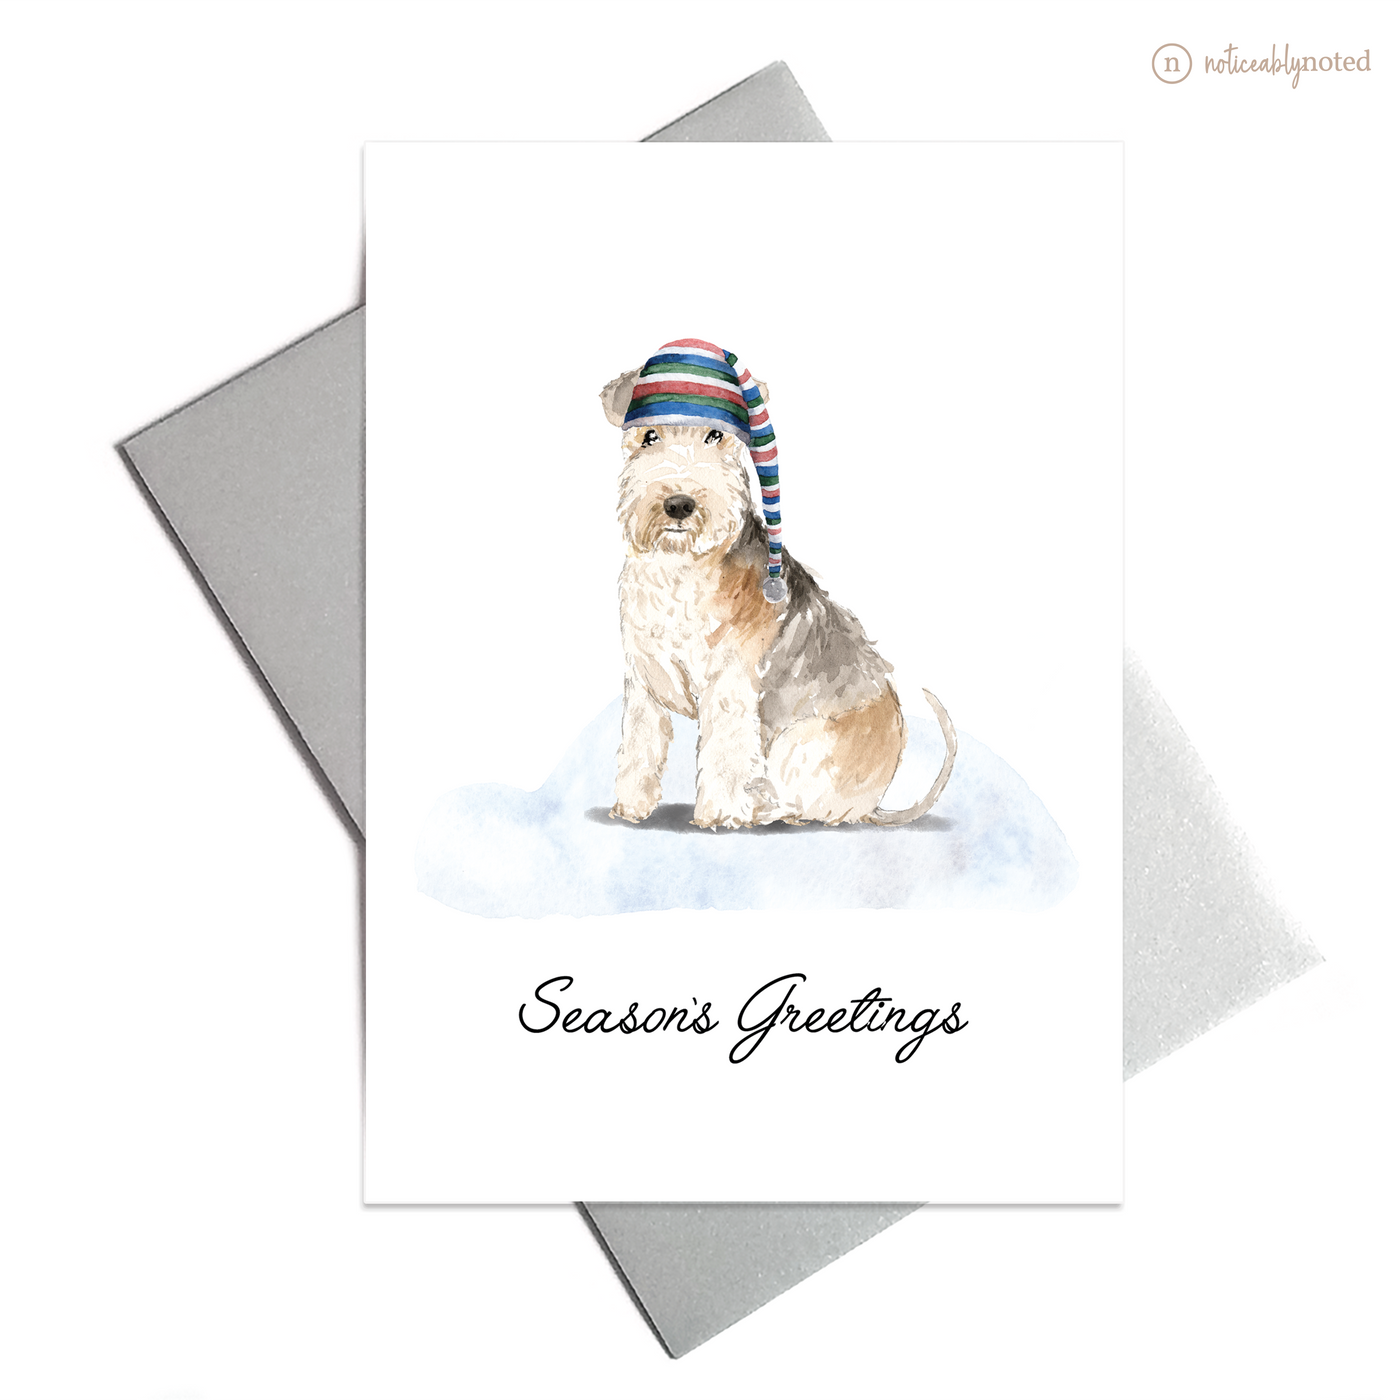 Lakeland Terrier Dog Holiday Card | Noticeably Noted